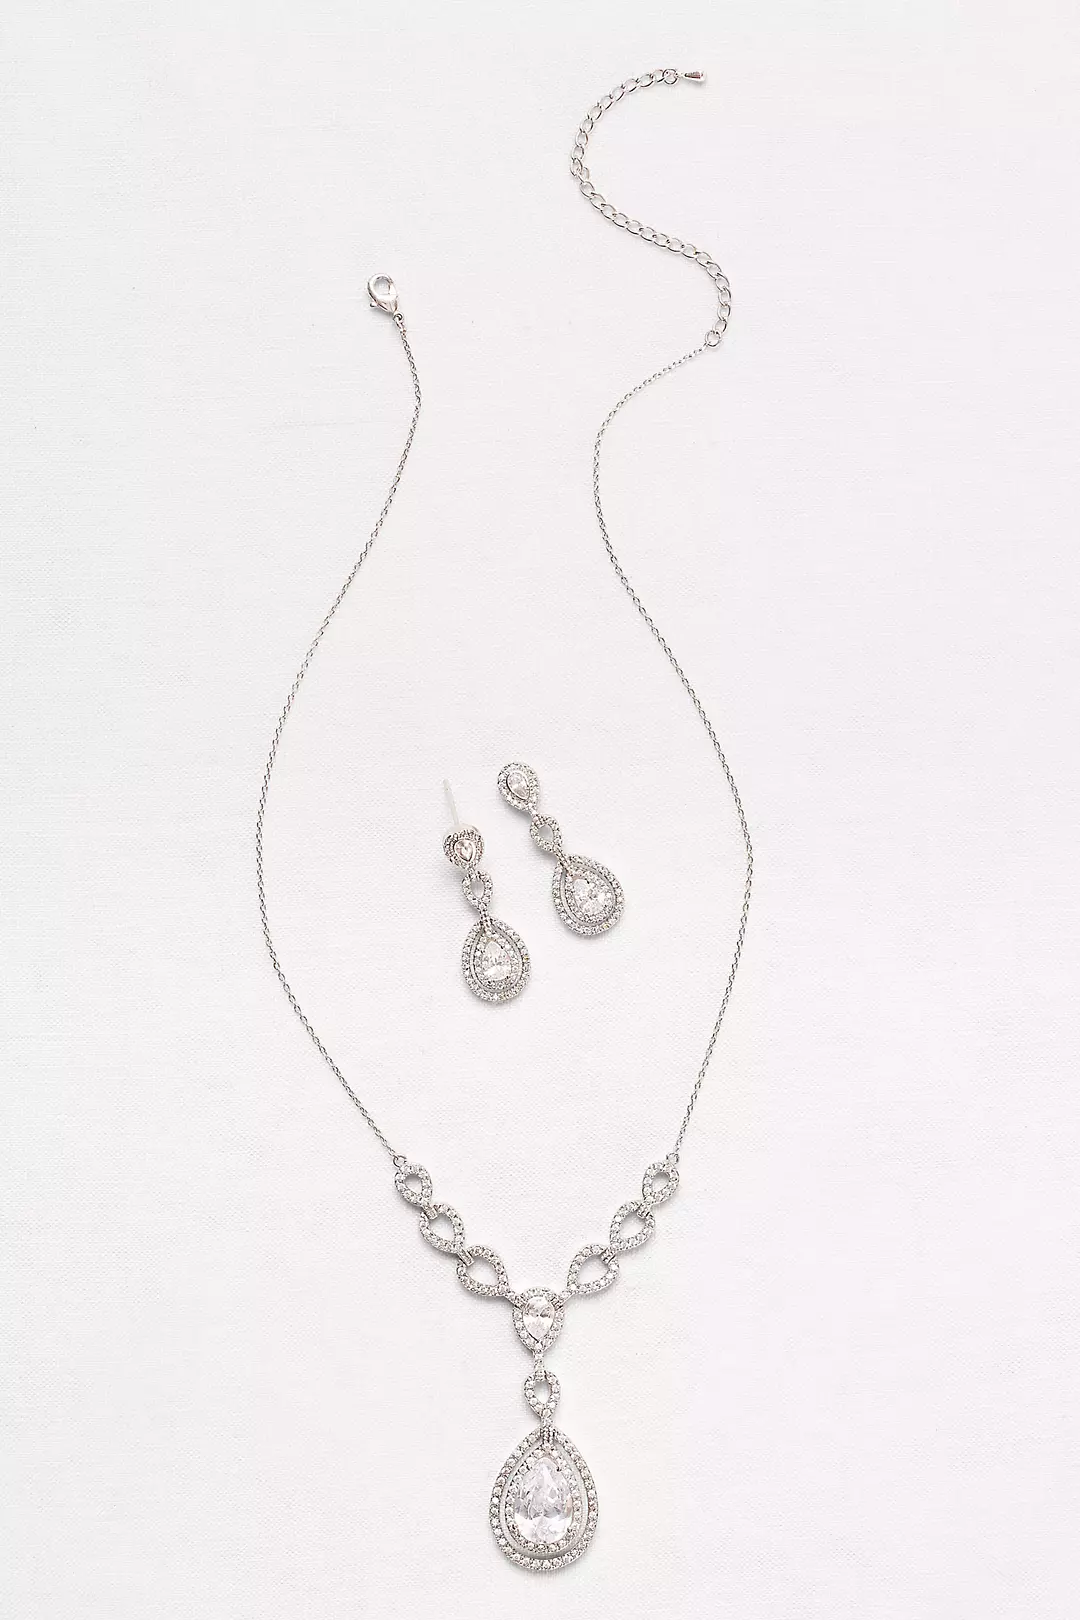 Layered Cubic Zirconia Necklace and Earring Set   Image